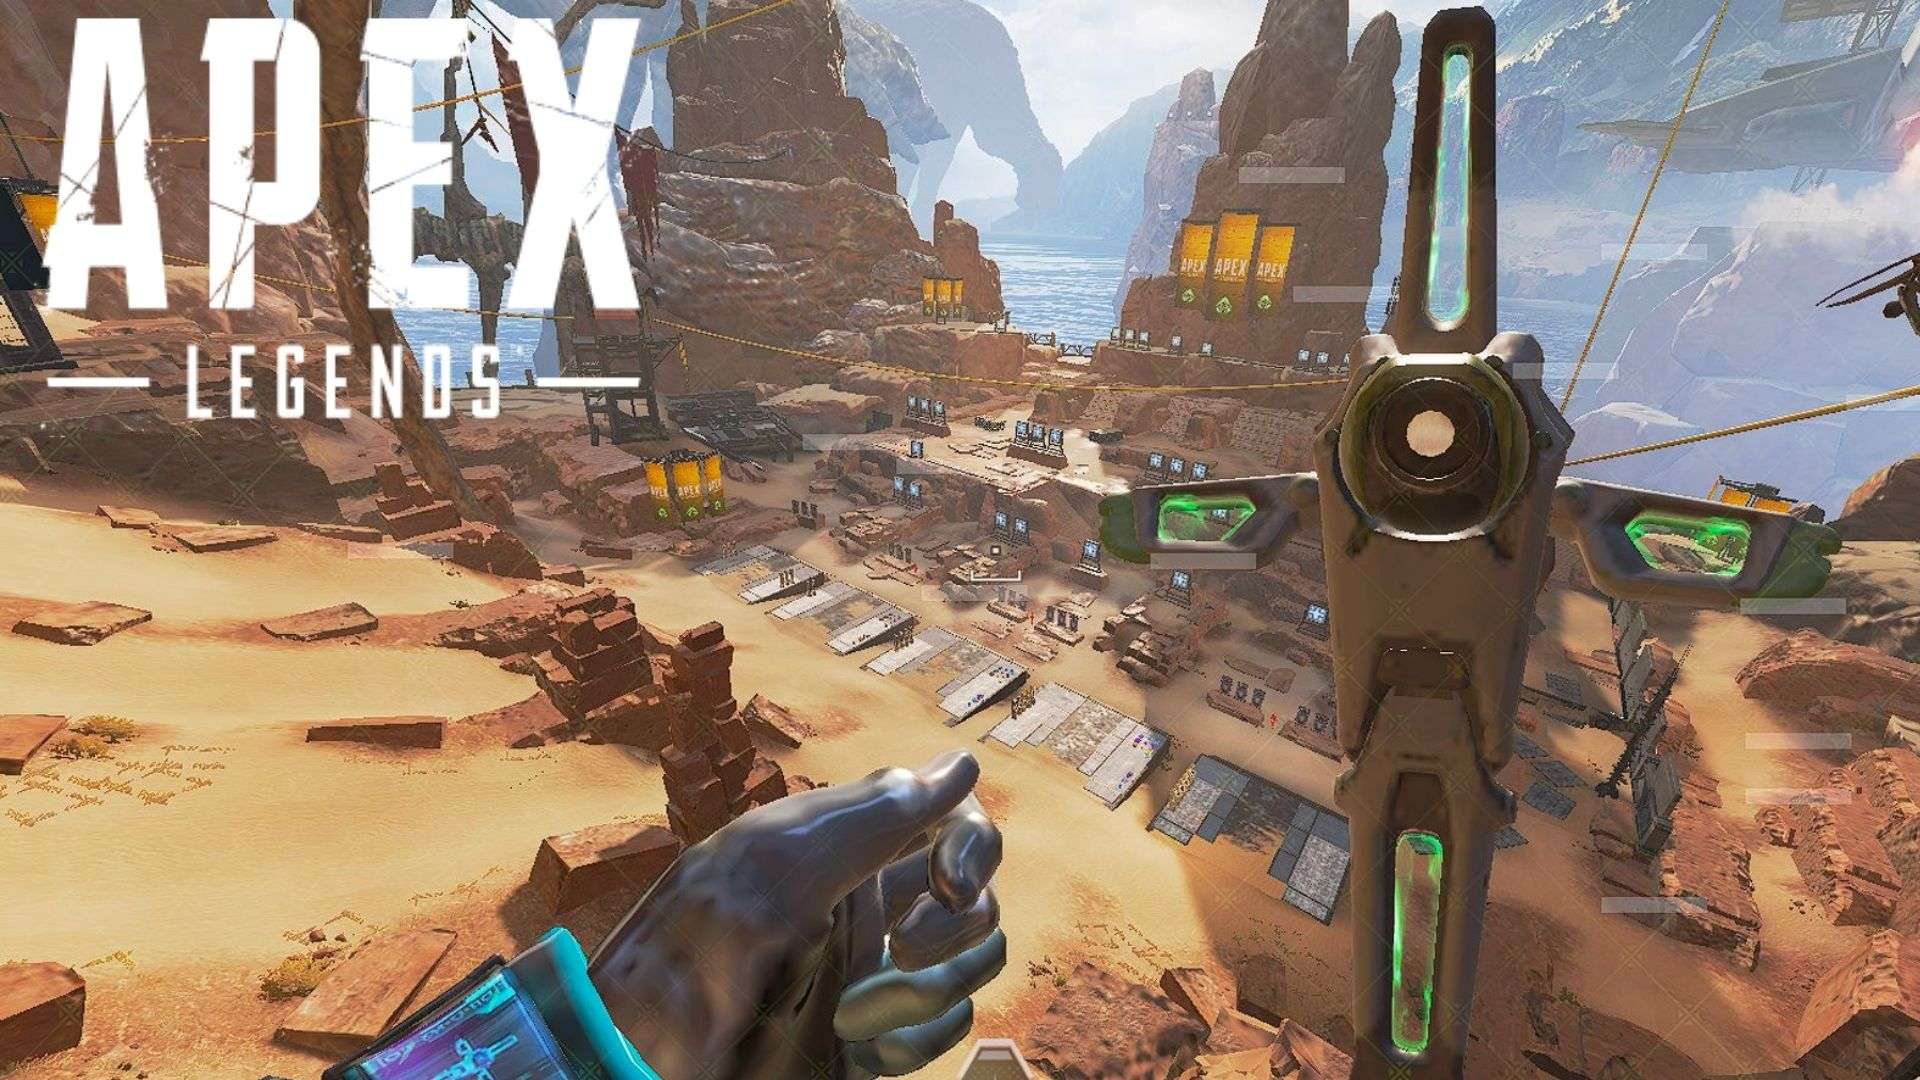 Crypto's drone in apex legends firing practice mode